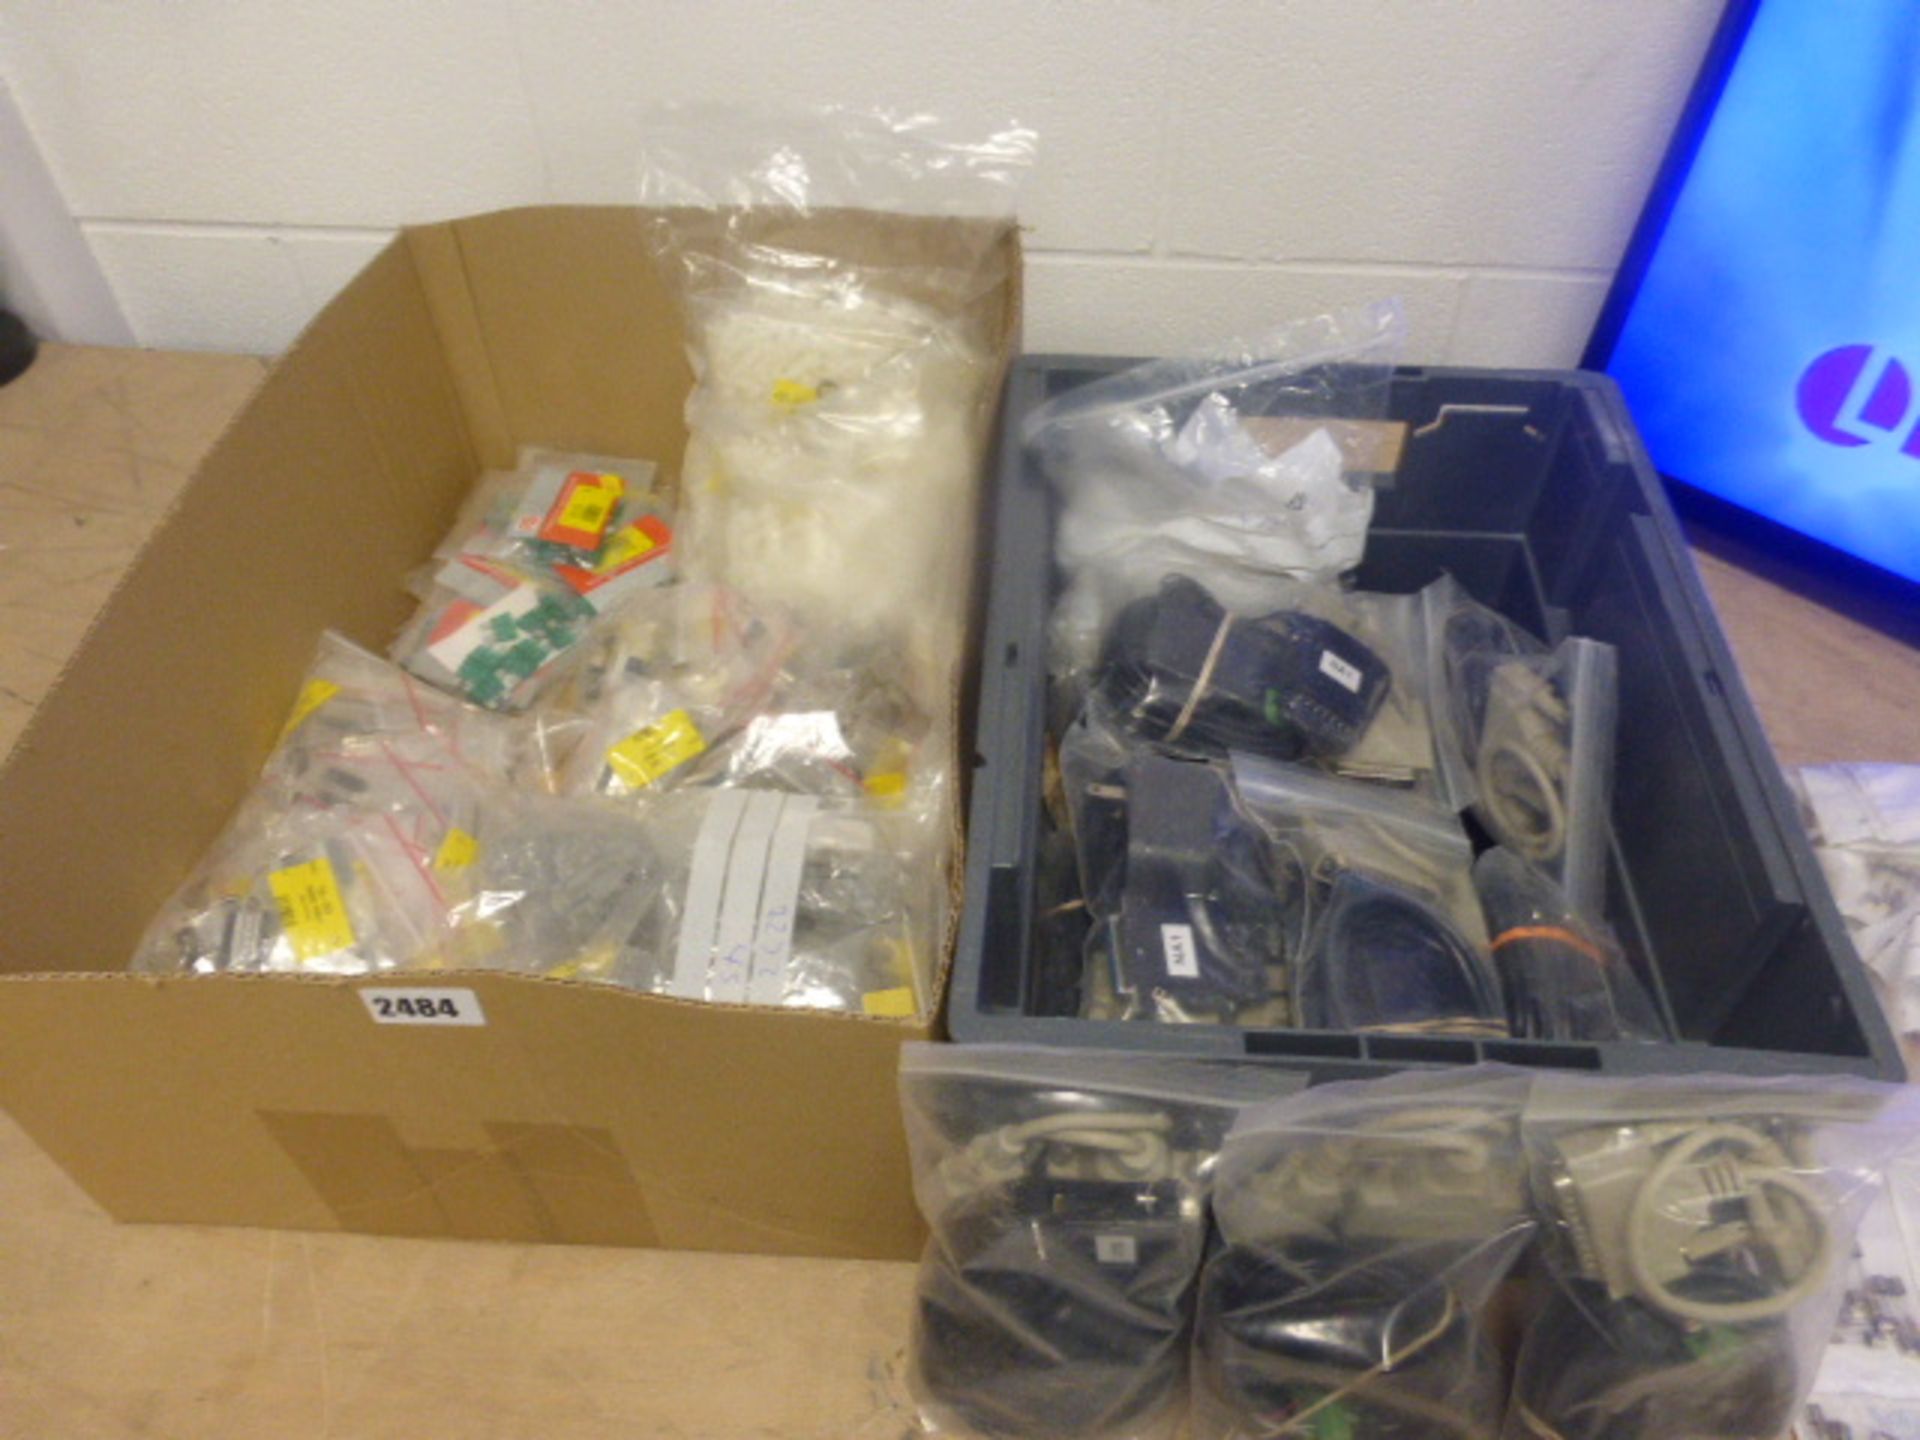 2 boxes of miscellaneous RS Components, to include sockets and cables